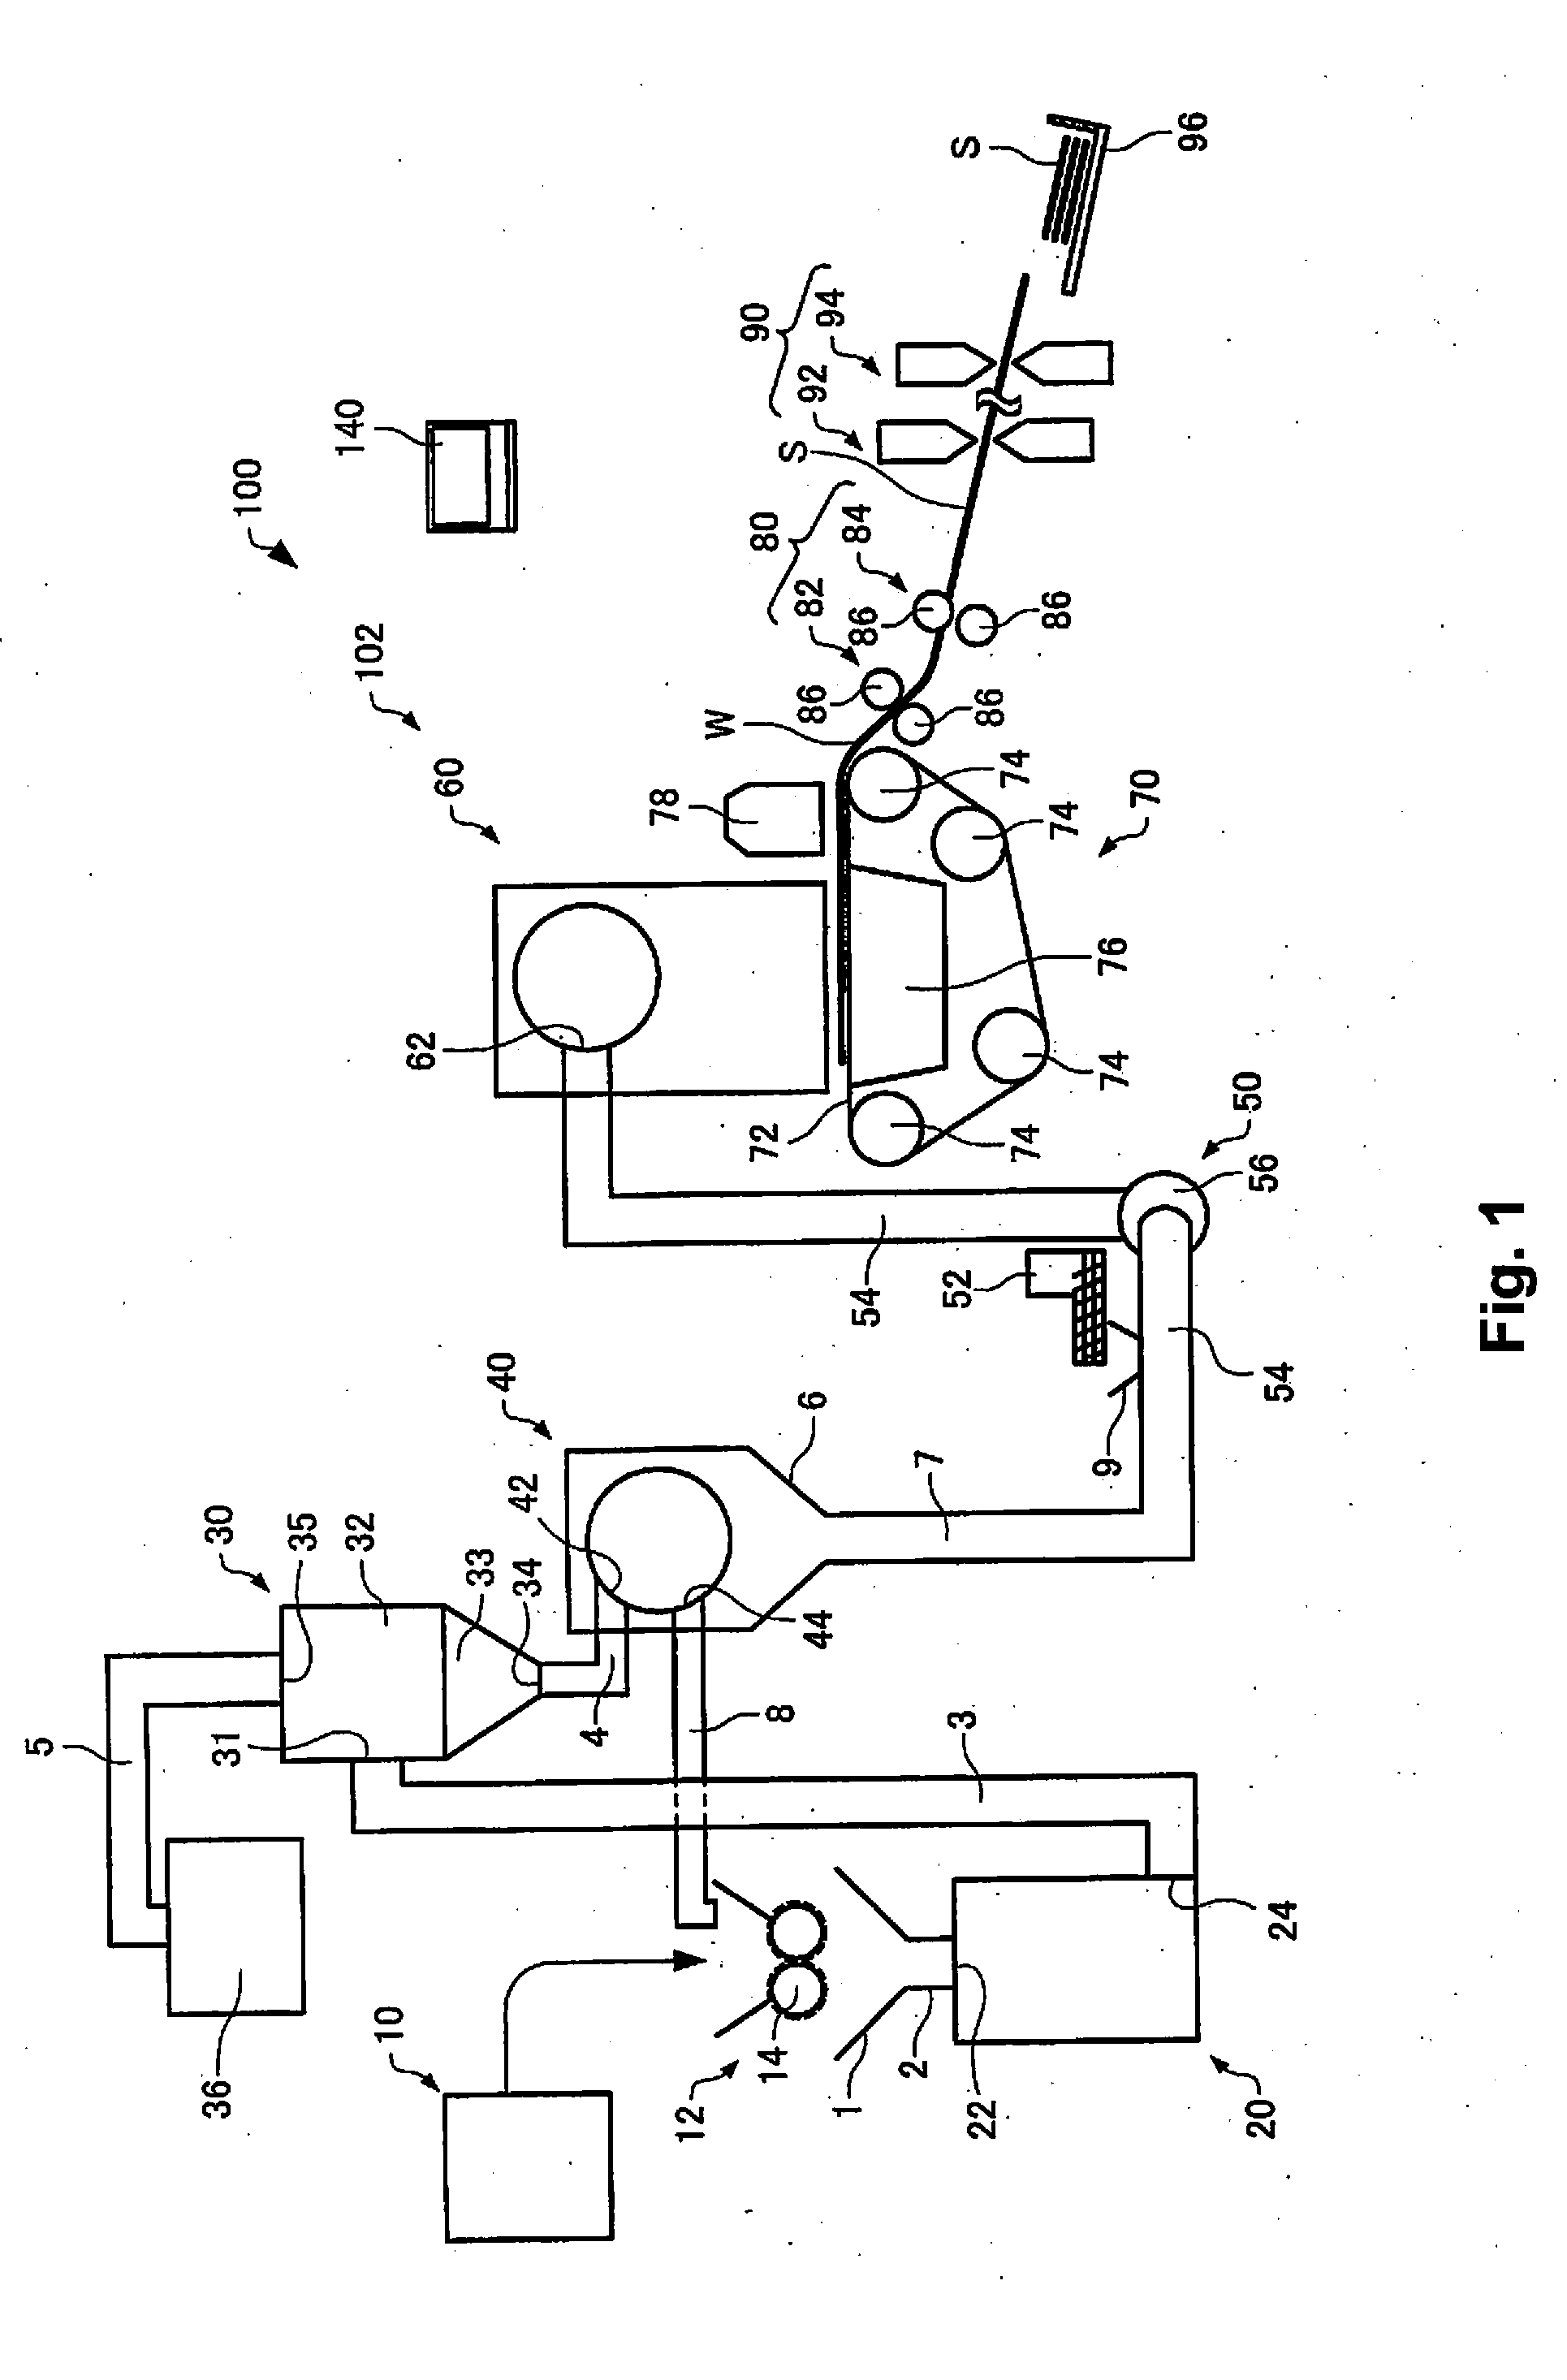 Sheet manufacturing apparatus, sheet manufacturing method, sheet manufactured using sheet manufacturing apparatus and sheet manufacturing method, and composite and container used in sheet manufacturing apparatus and sheet manufacturing method